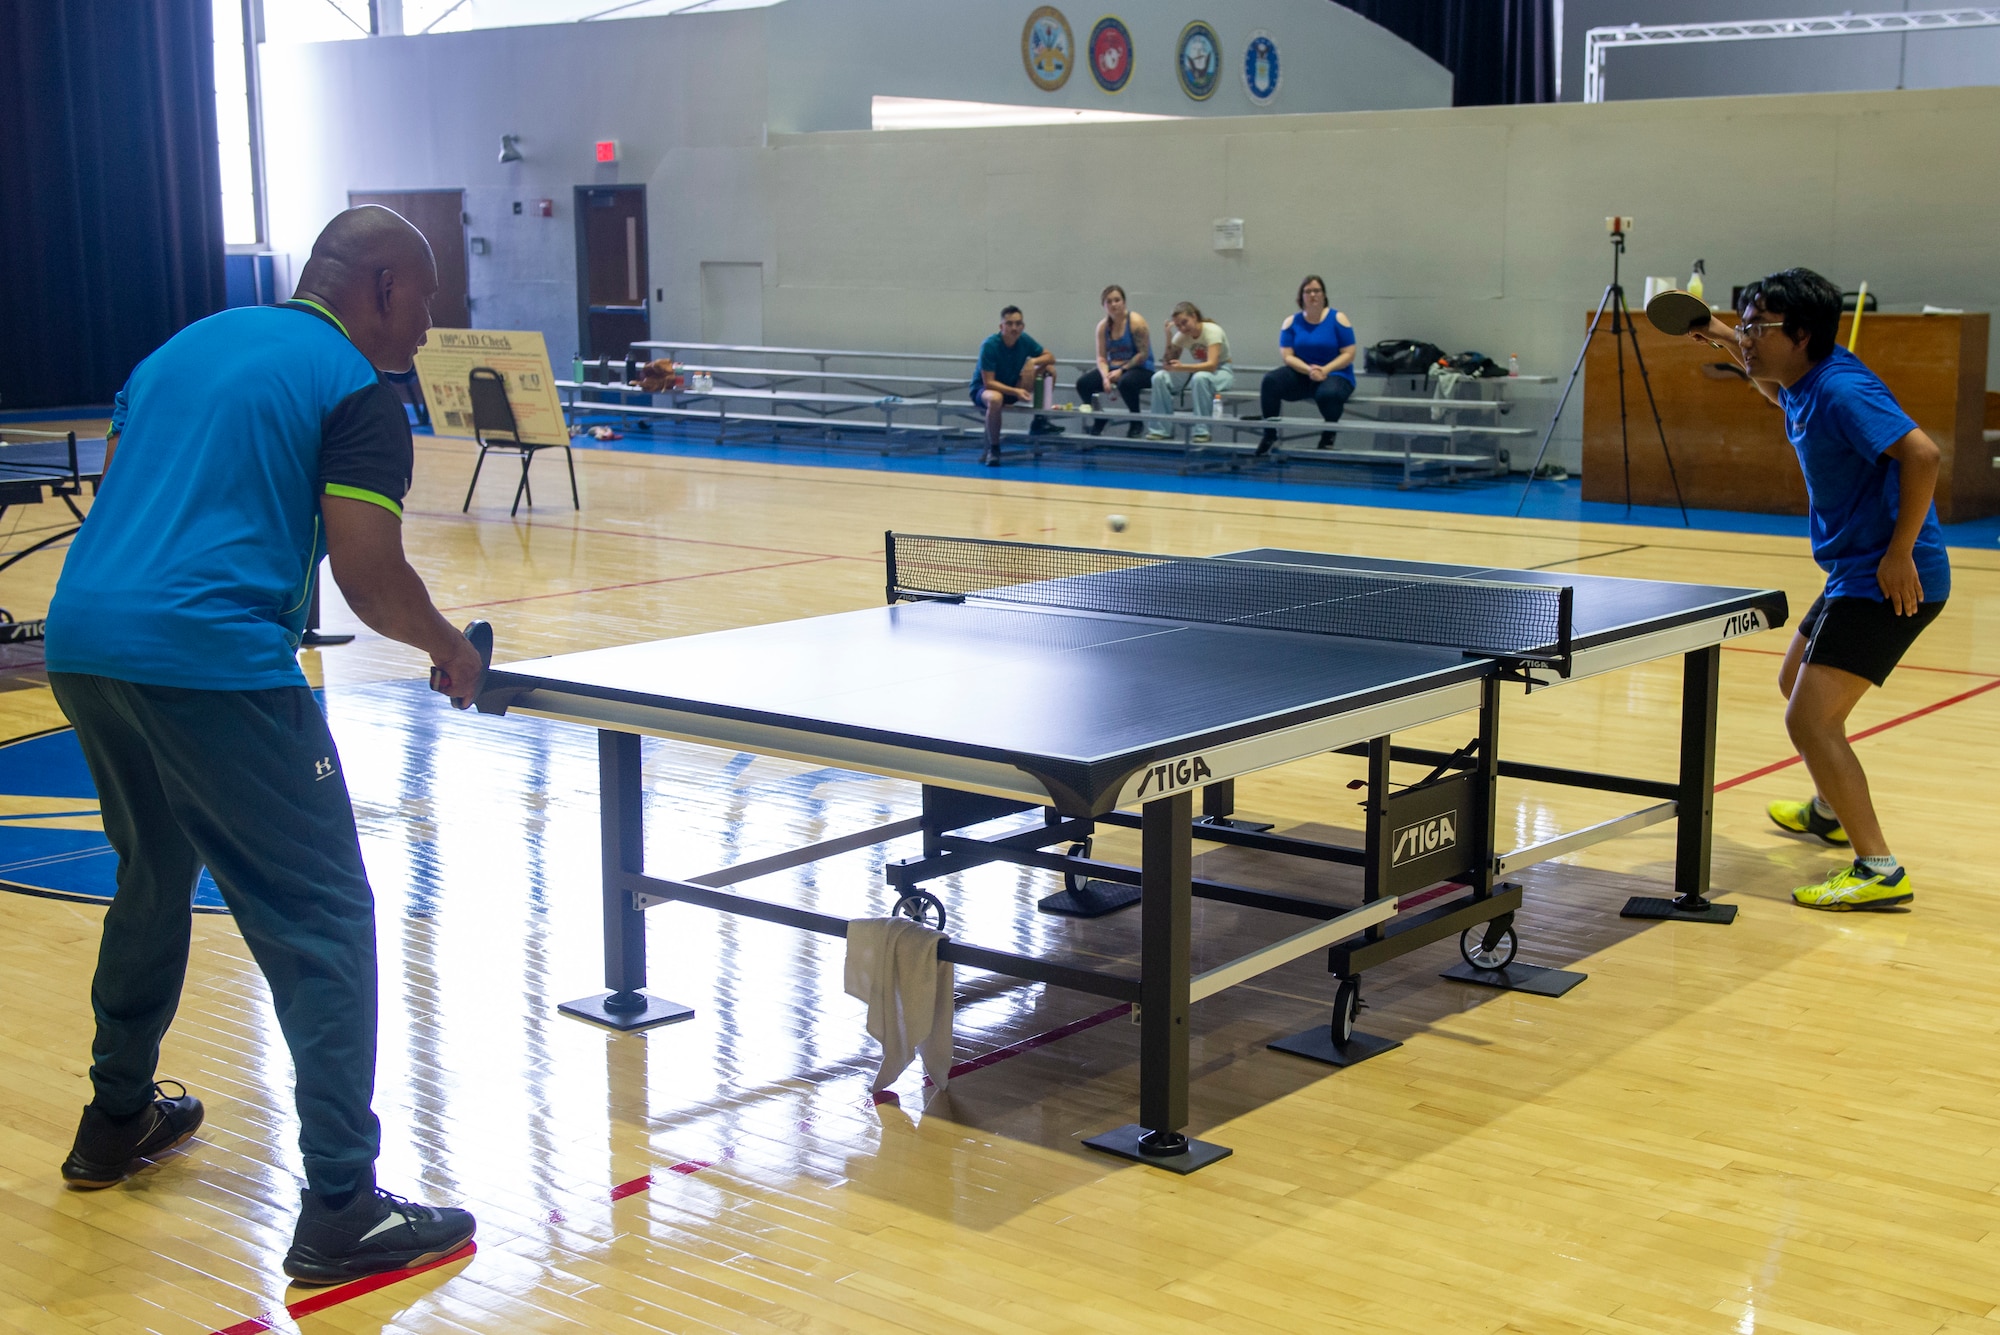 Participants face off in the Ping-Pong tournament finals.